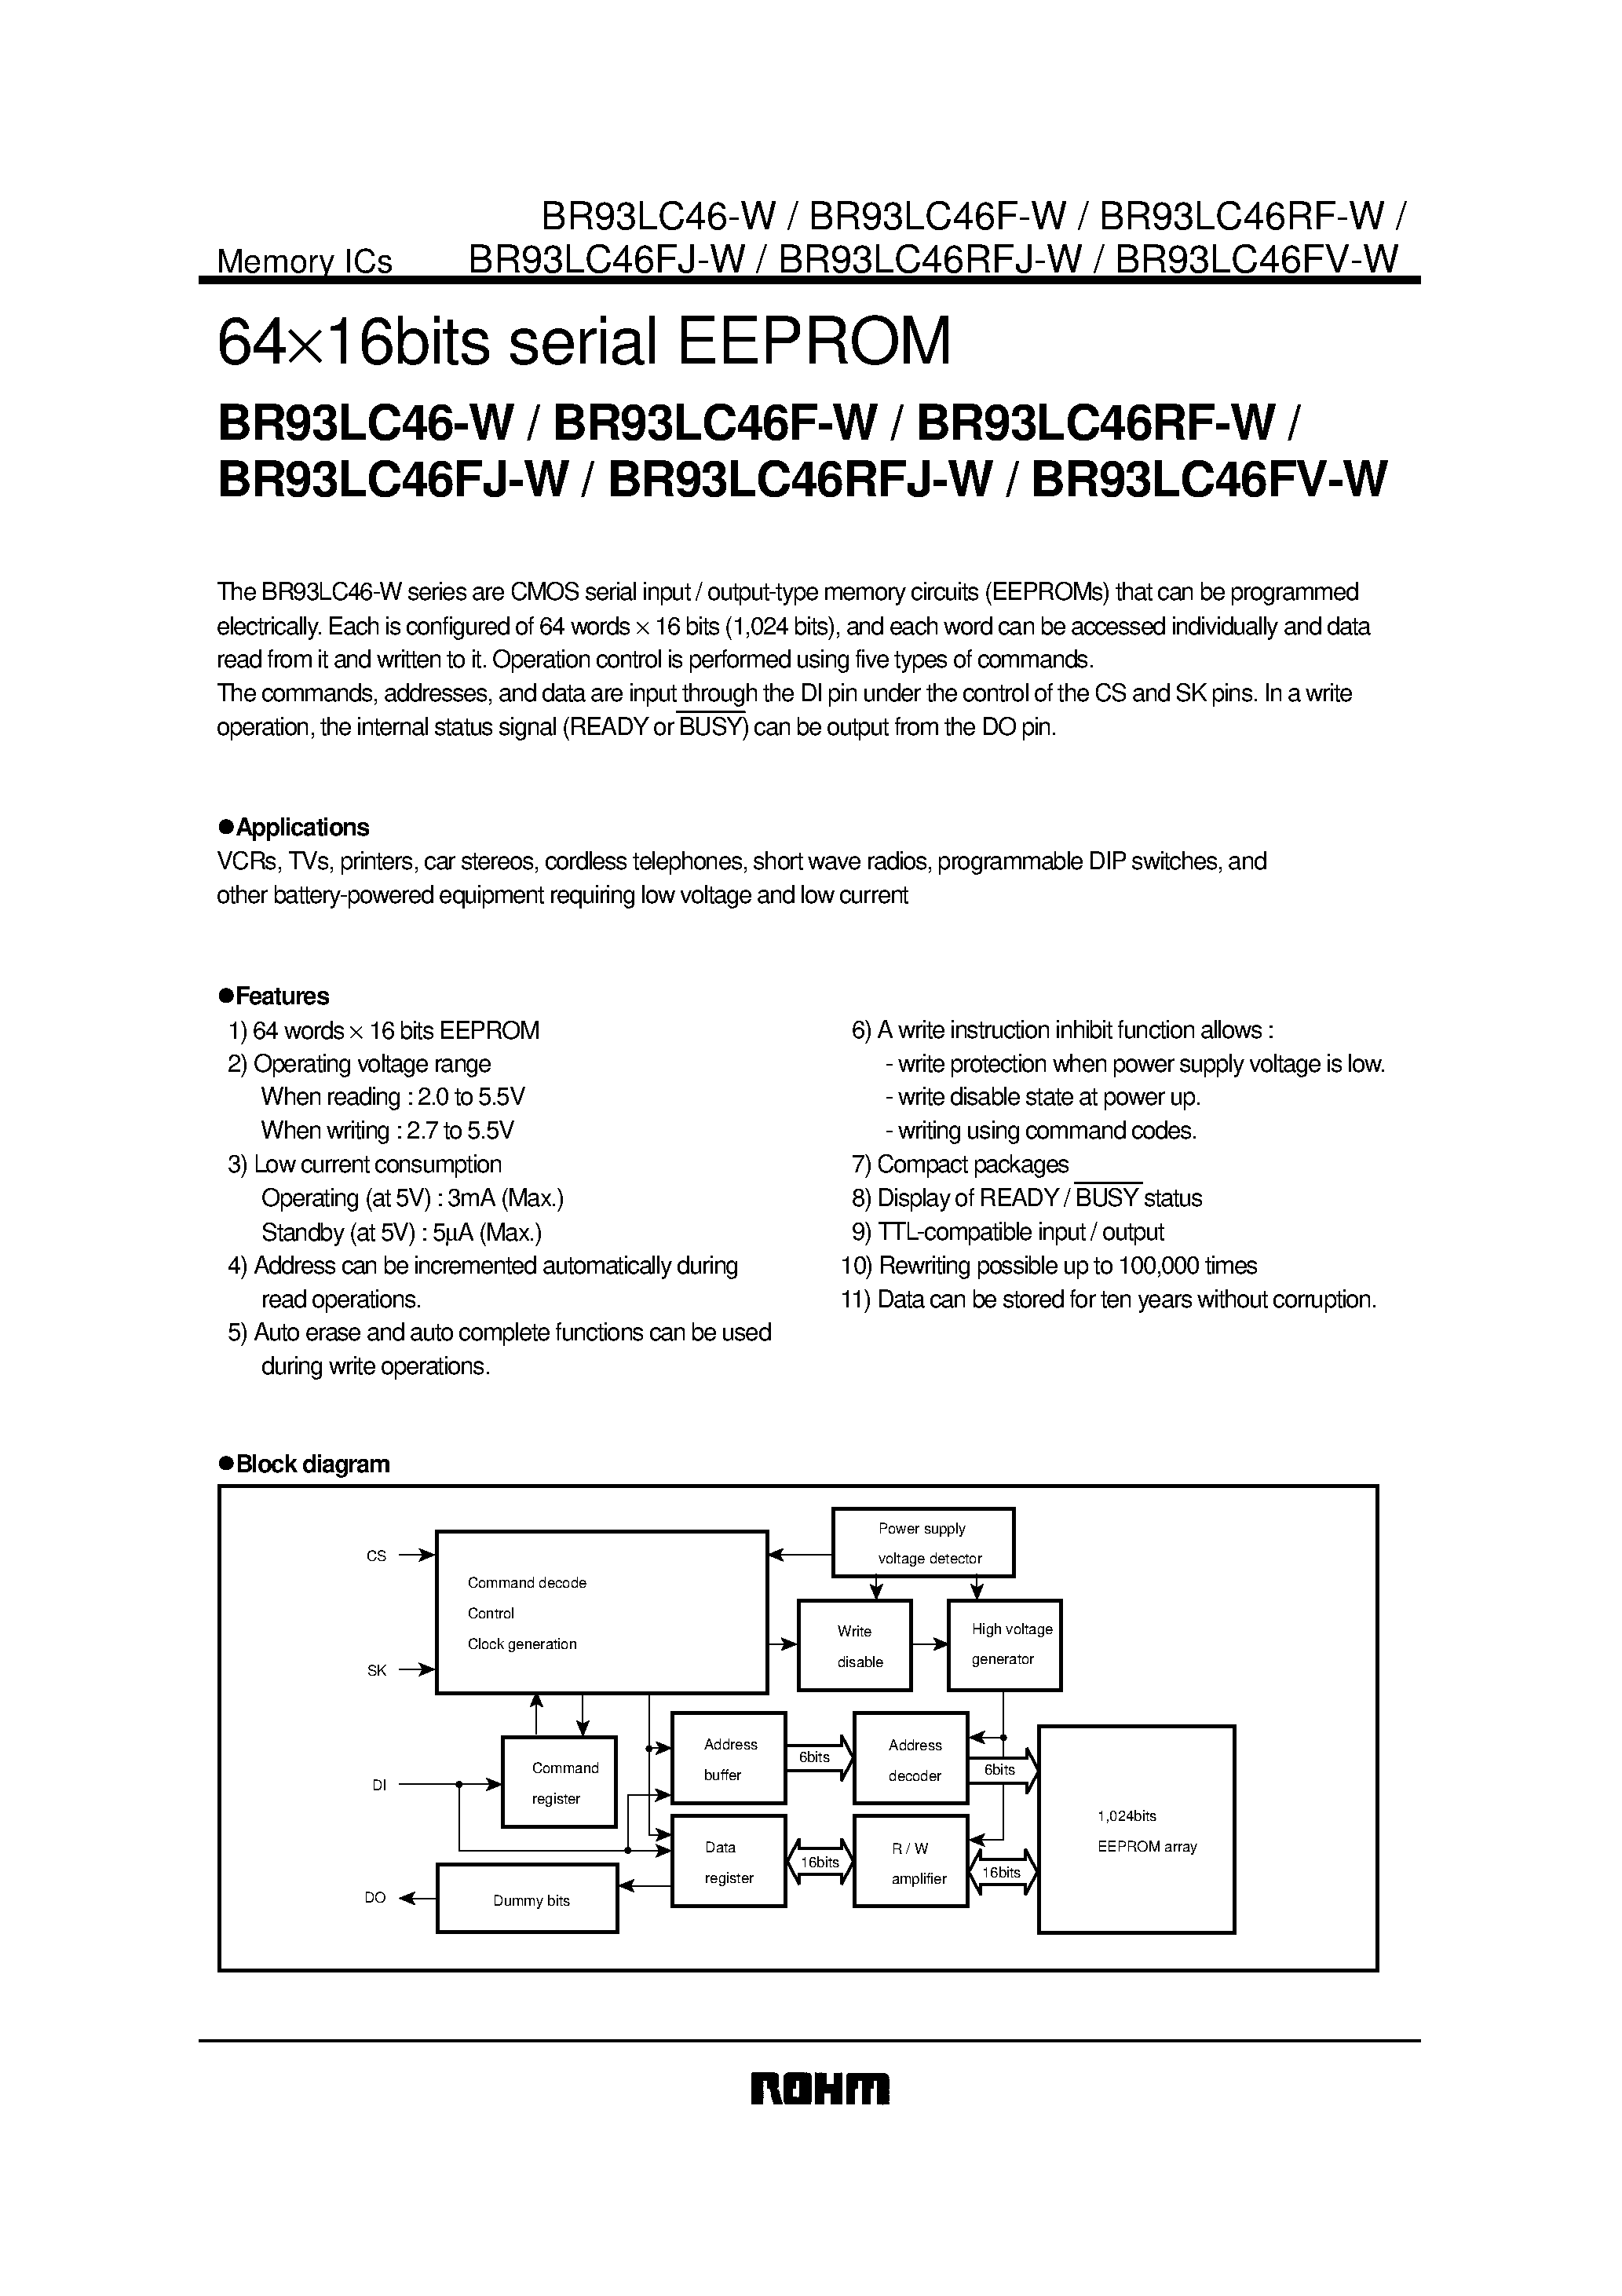 Datasheet BR93LC46RF-W - 6416bits serial EEPROM page 1